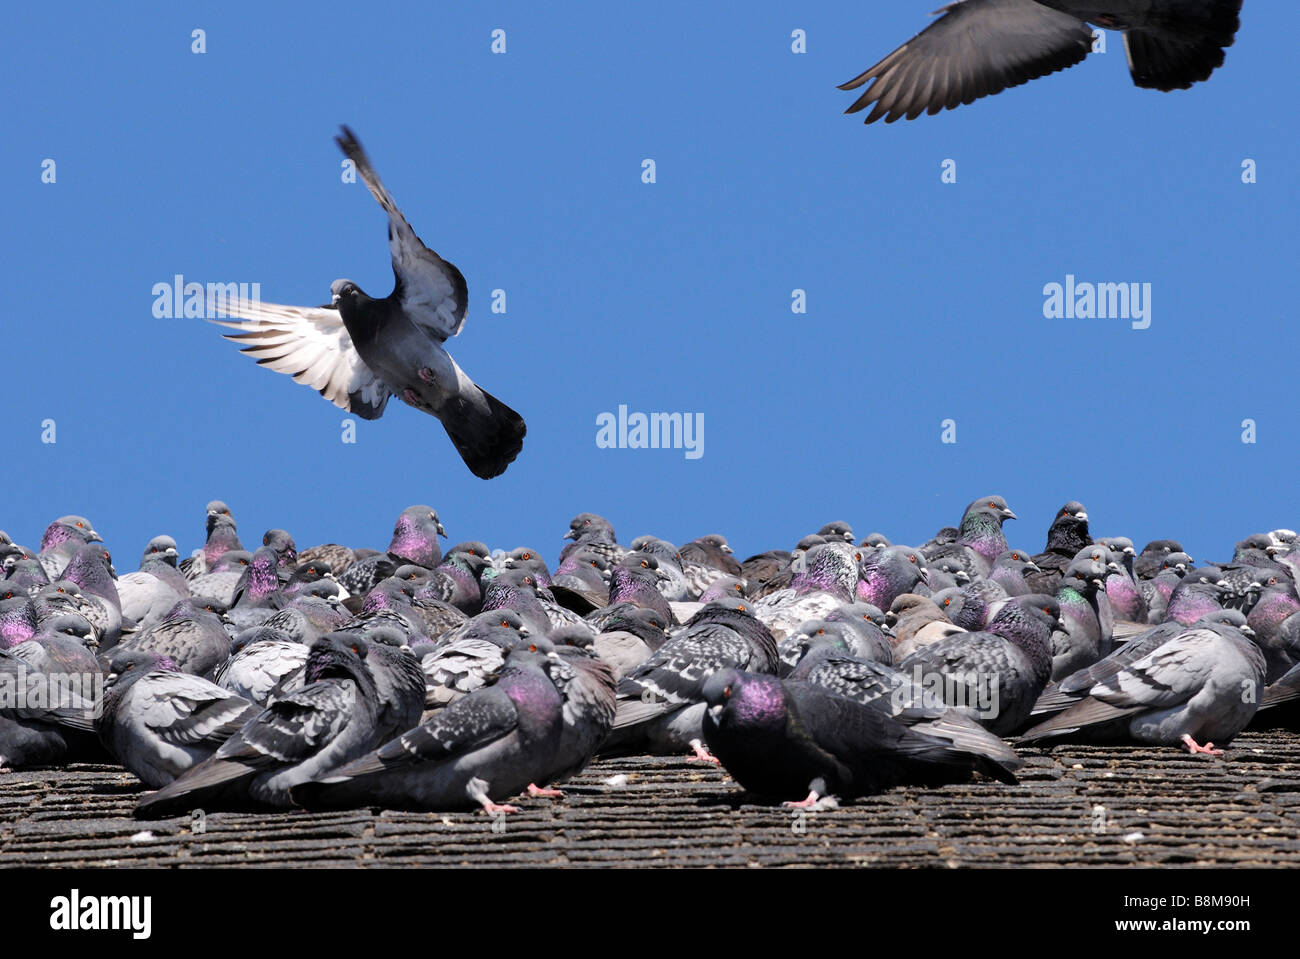 Pigeons, birds sitting on the tar shingle roof on a cold Canadian winter day, as one bird takes flight leaving the others behind Stock Photo